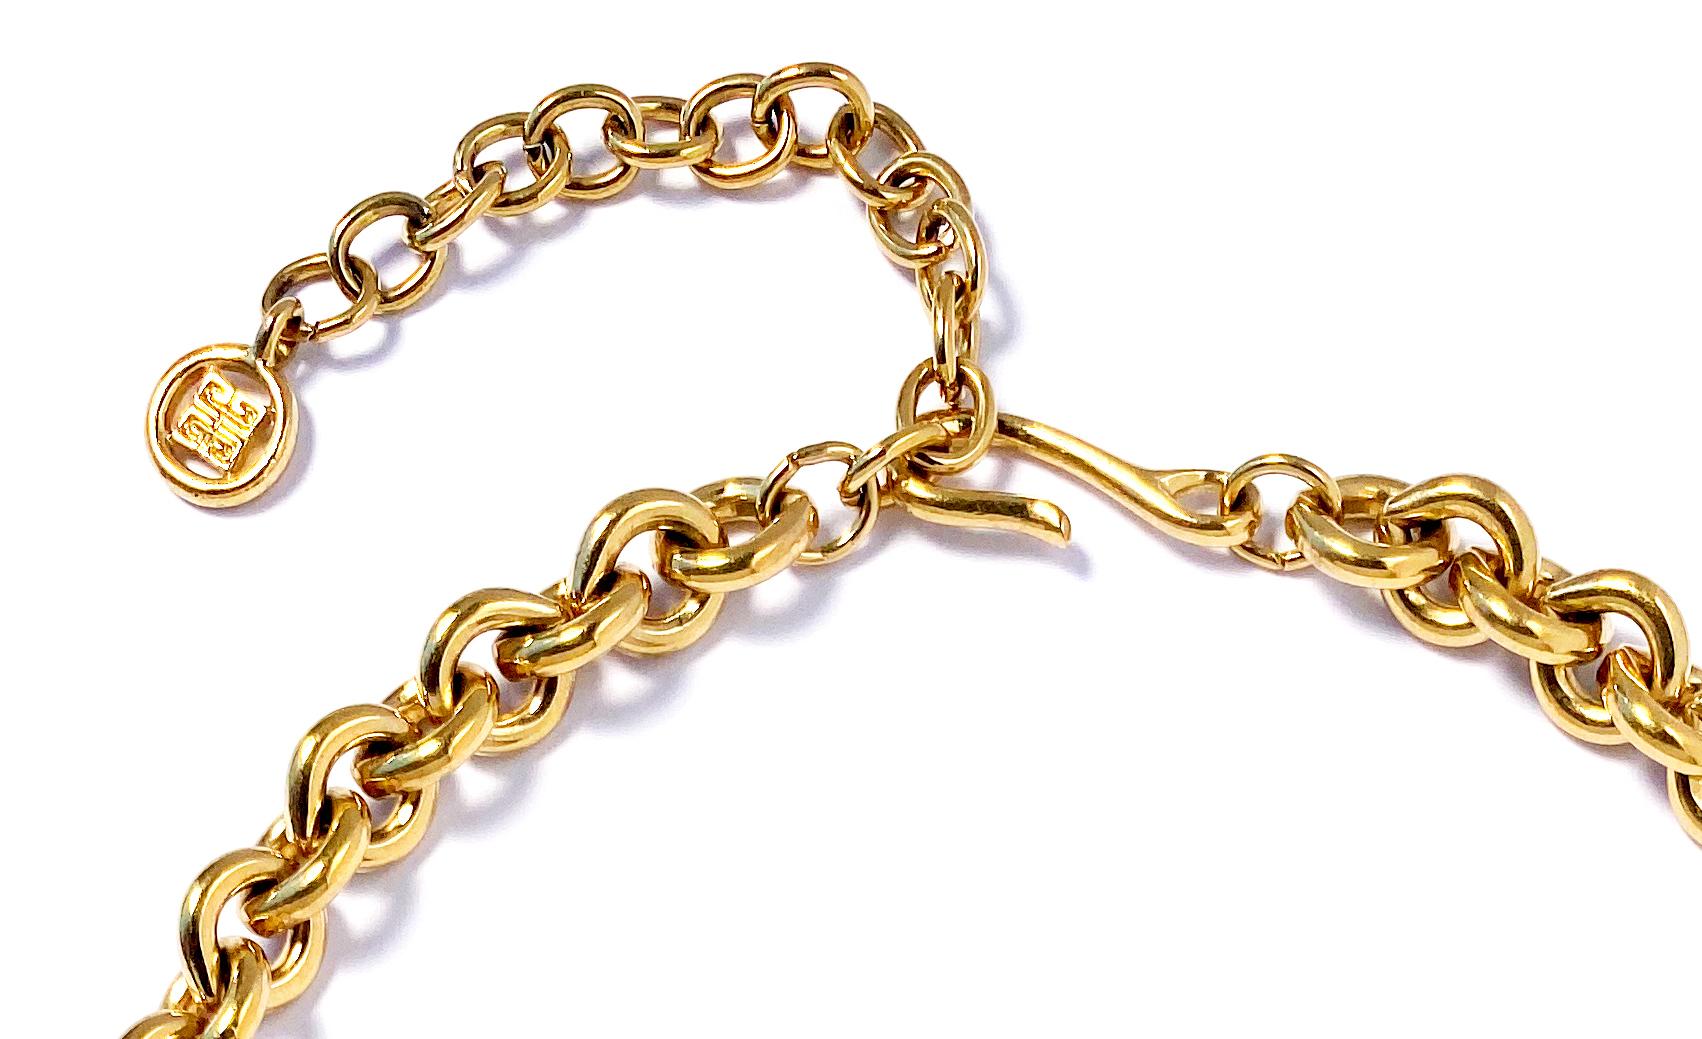 Vintage 1990s Givenchy round link chain necklace in gold plate.  This choker length heritage necklace comprises heavy round links with an elegant hook and loop closure and extension chain punctuated by the Givenchy 4G logo.  The extension chain